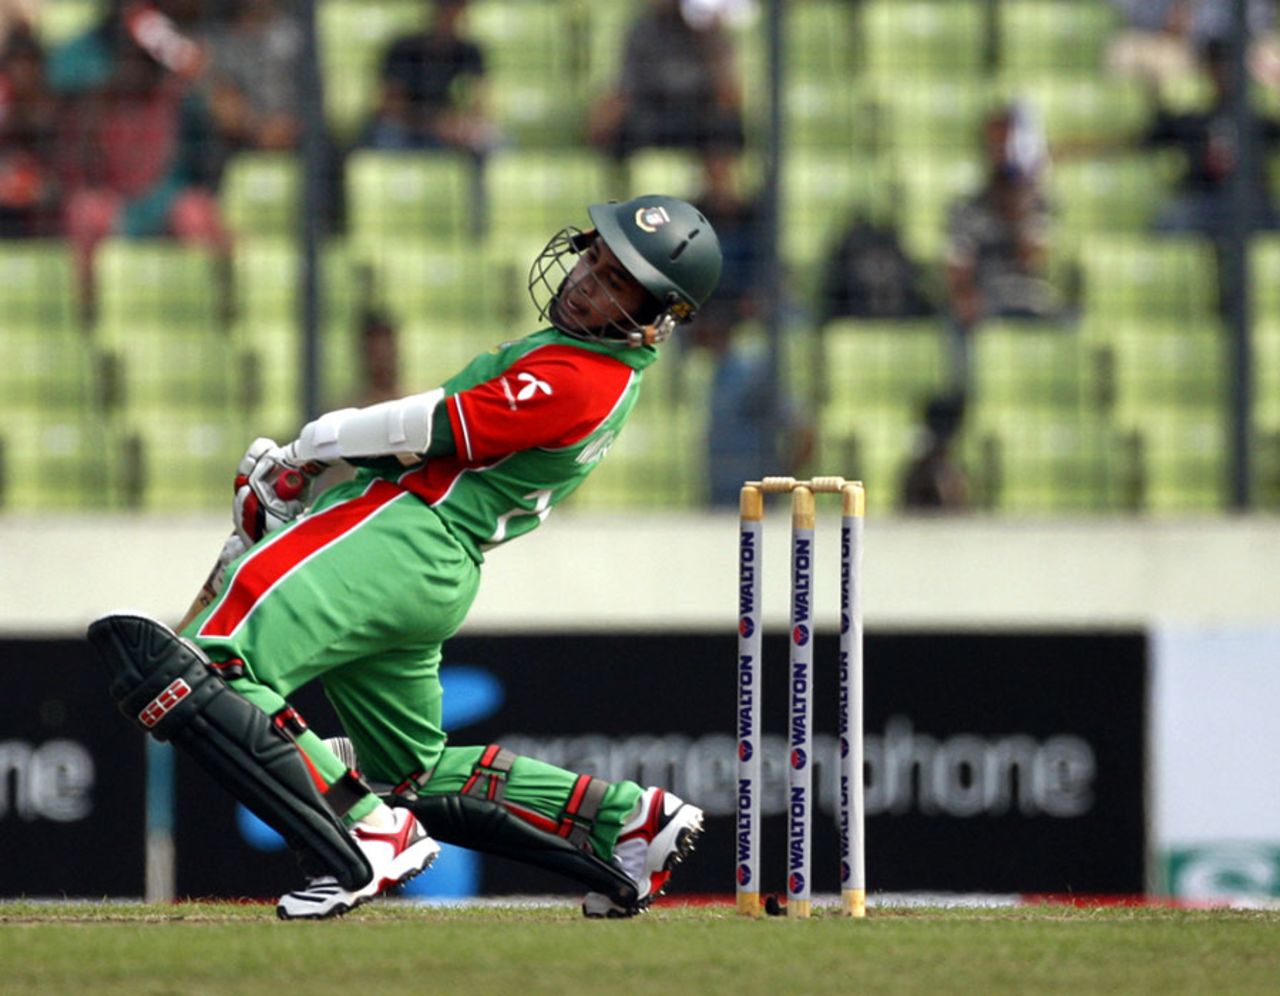 Mushfiqur Rahim sways out of the way of a delivery, Bangladesh v West Indies, 2nd ODI, Mirpur, October 15, 2011